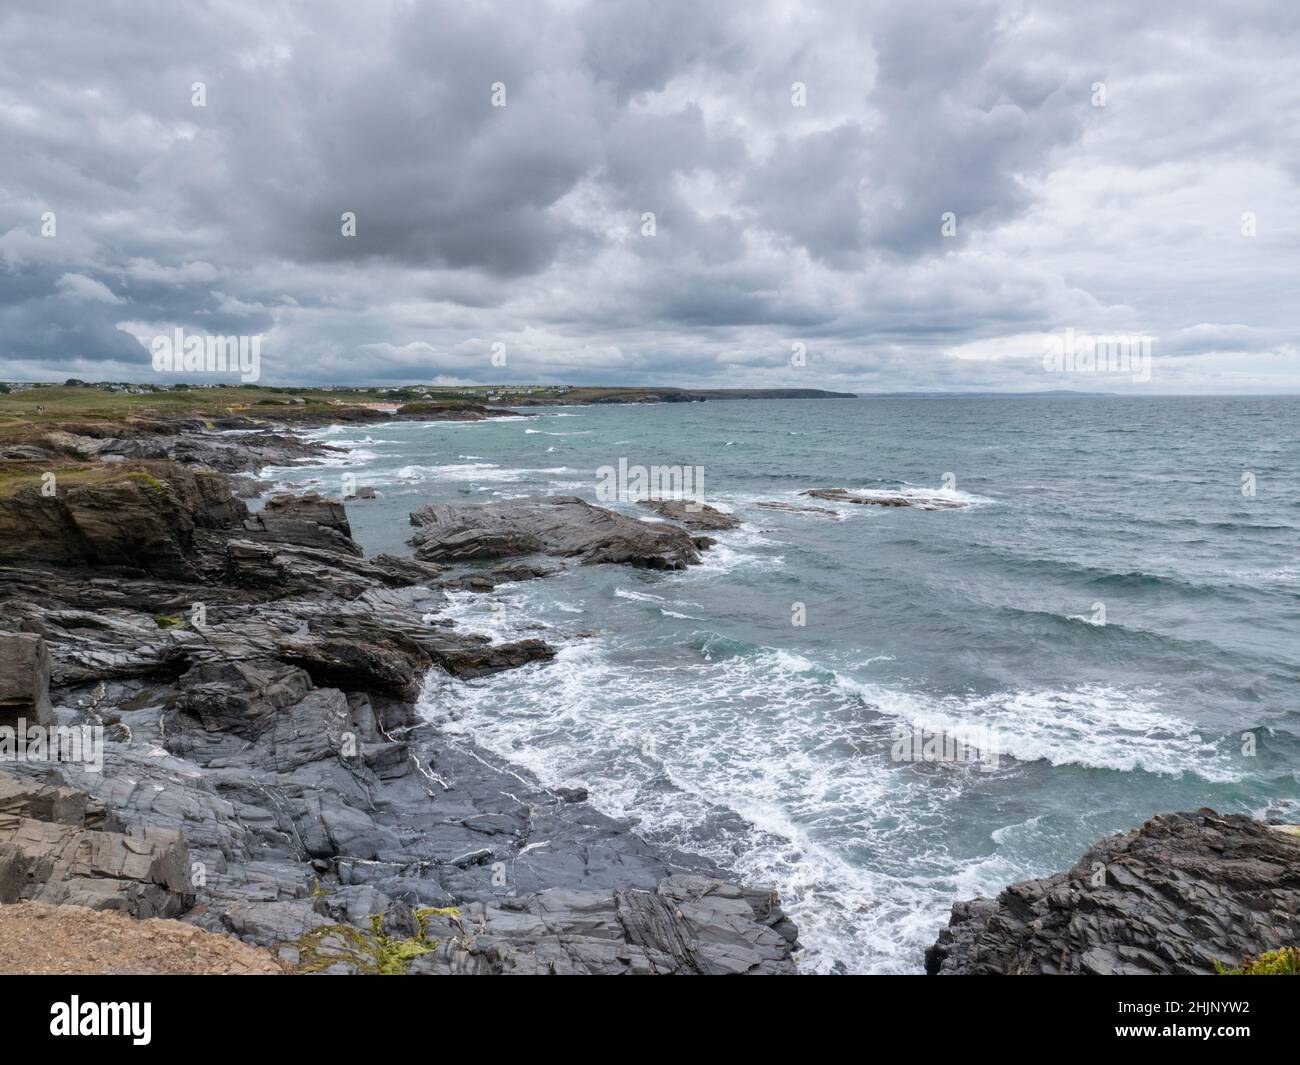 A view out to the Atlantic Ocean on the rocky shore of North Cornwall near Treyarnon Bay showing the sea, waves and a grey cldy sky in summer UK Stock Photo